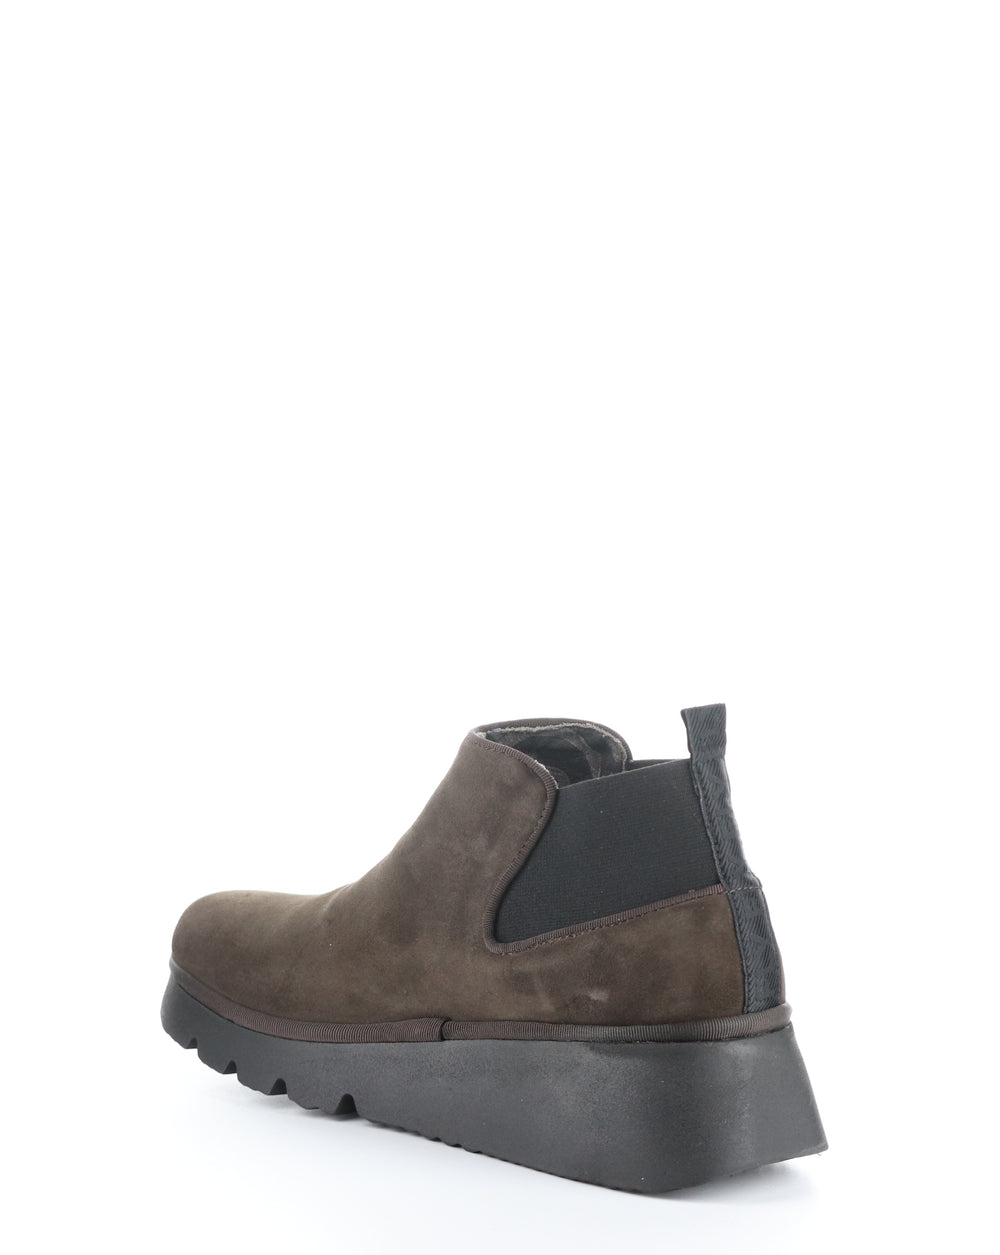 PADA403FLY 004 DK TAUPE Elasticated Boots